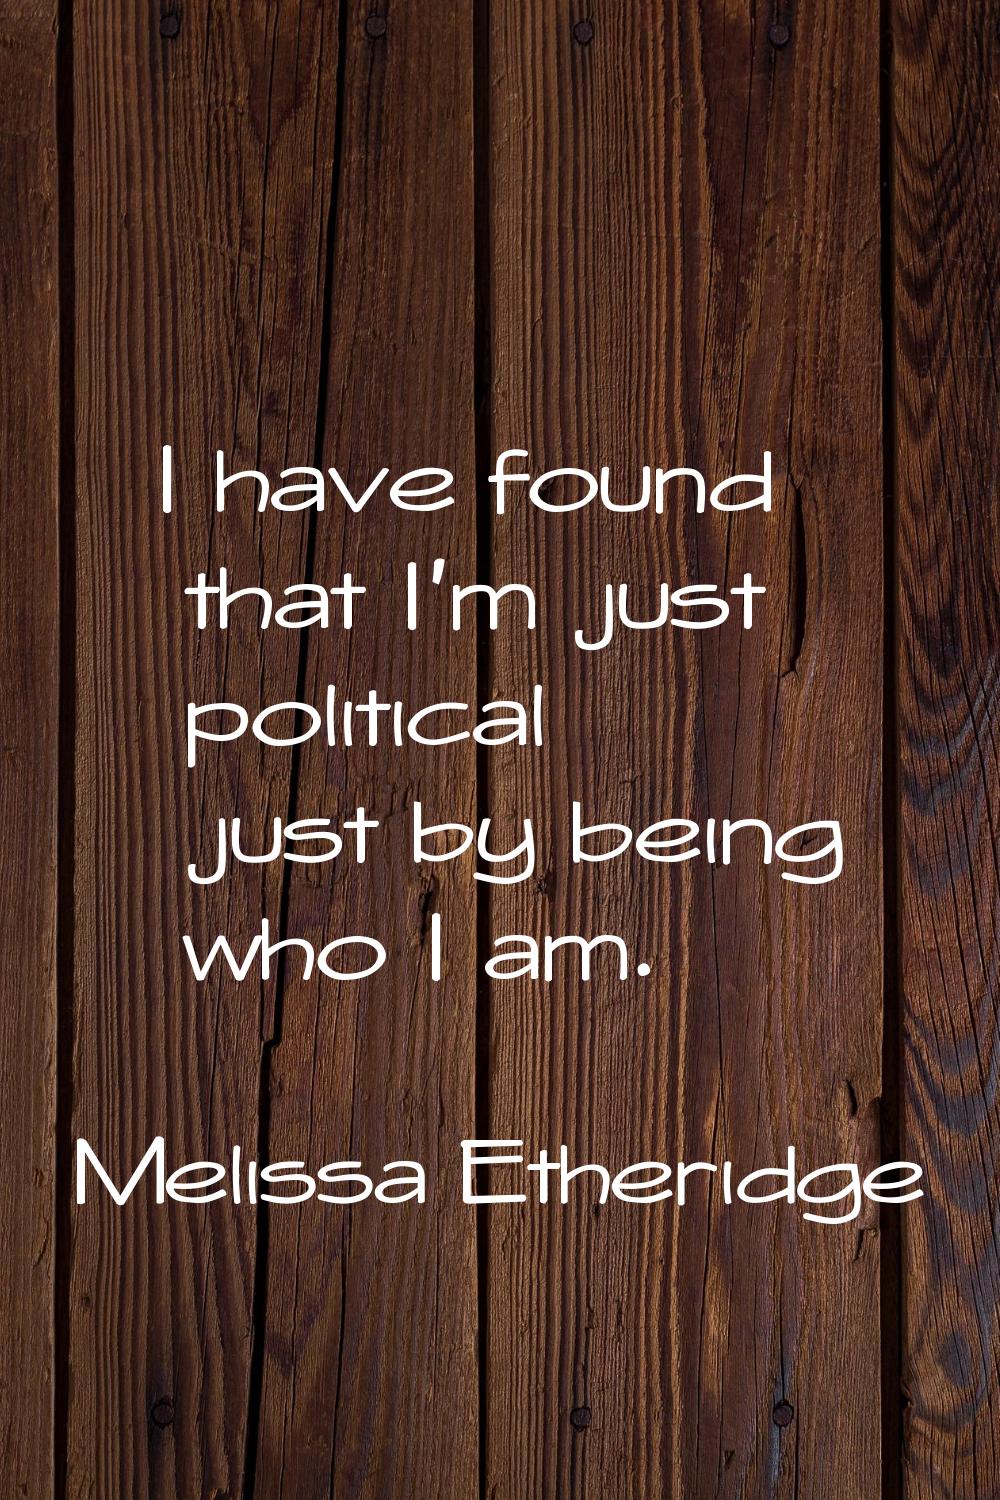 I have found that I'm just political just by being who I am.